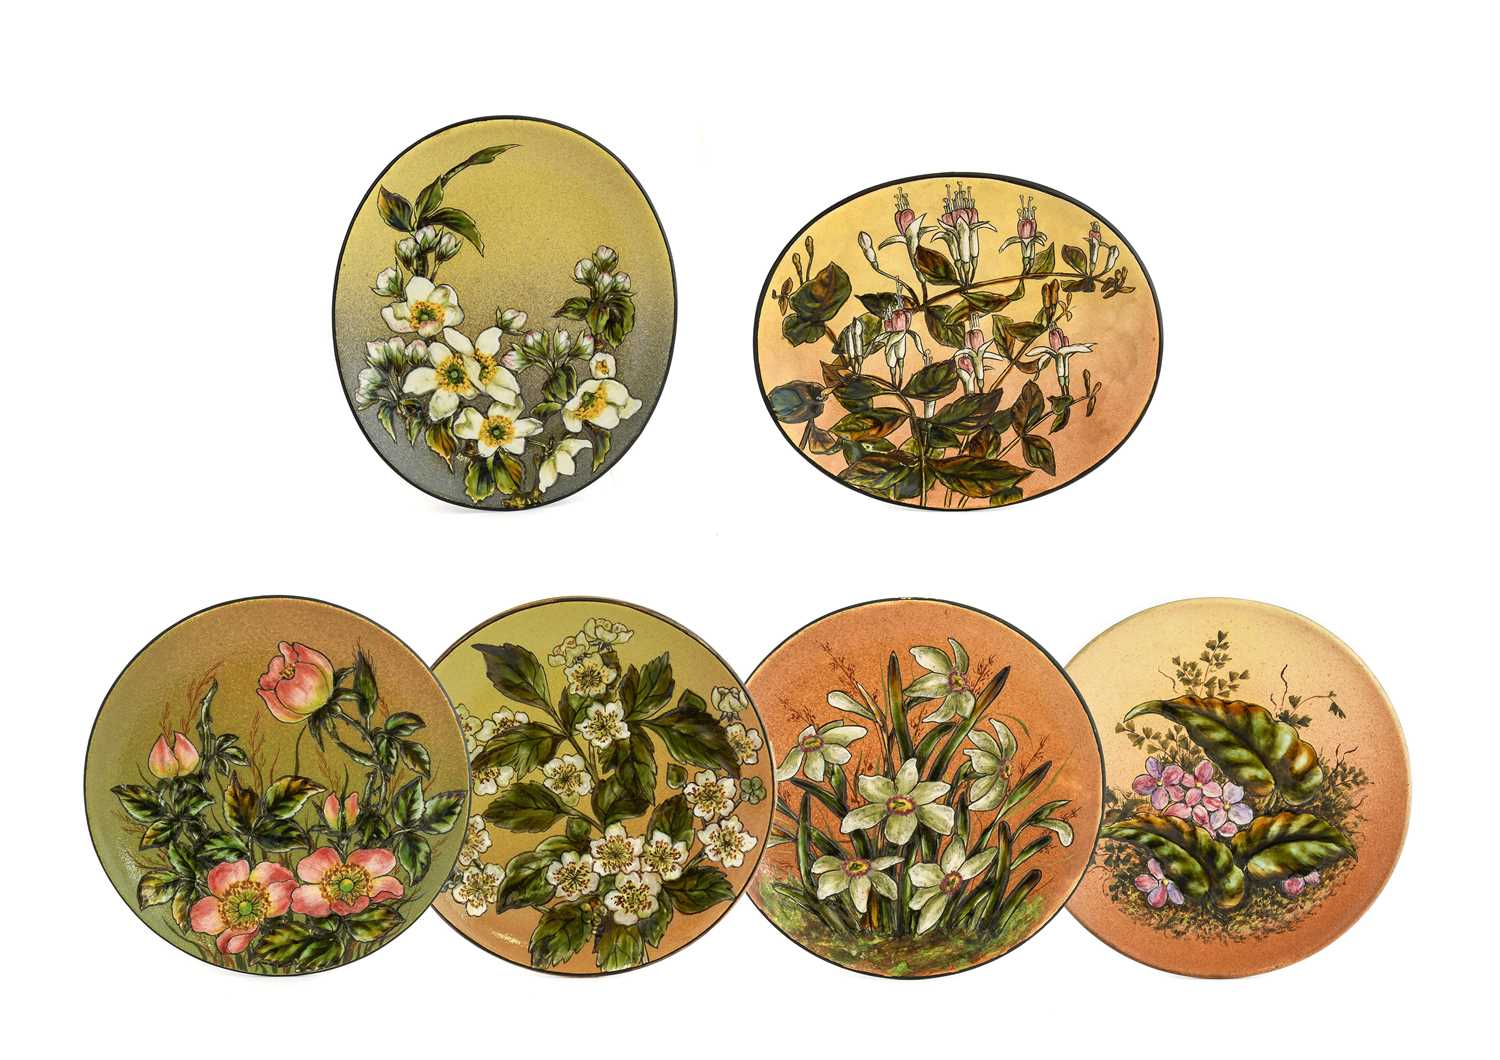 Christopher Dresser (Scottish, 1834-1904) for Linthorpe Pottery: A Dish, painted with fushsias,